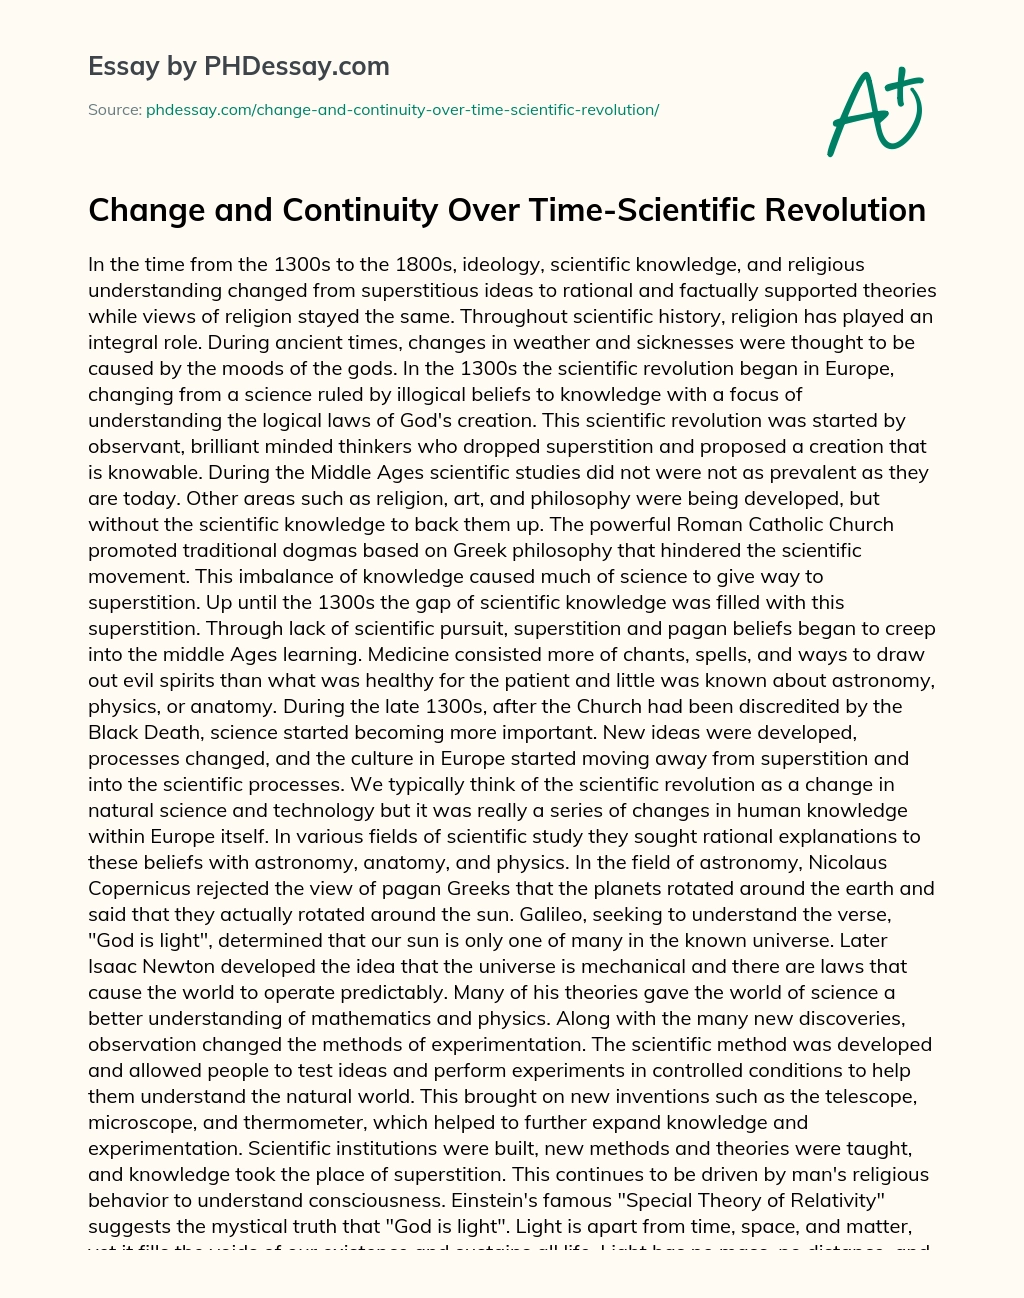 Change and Continuity Over Time-Scientific Revolution essay